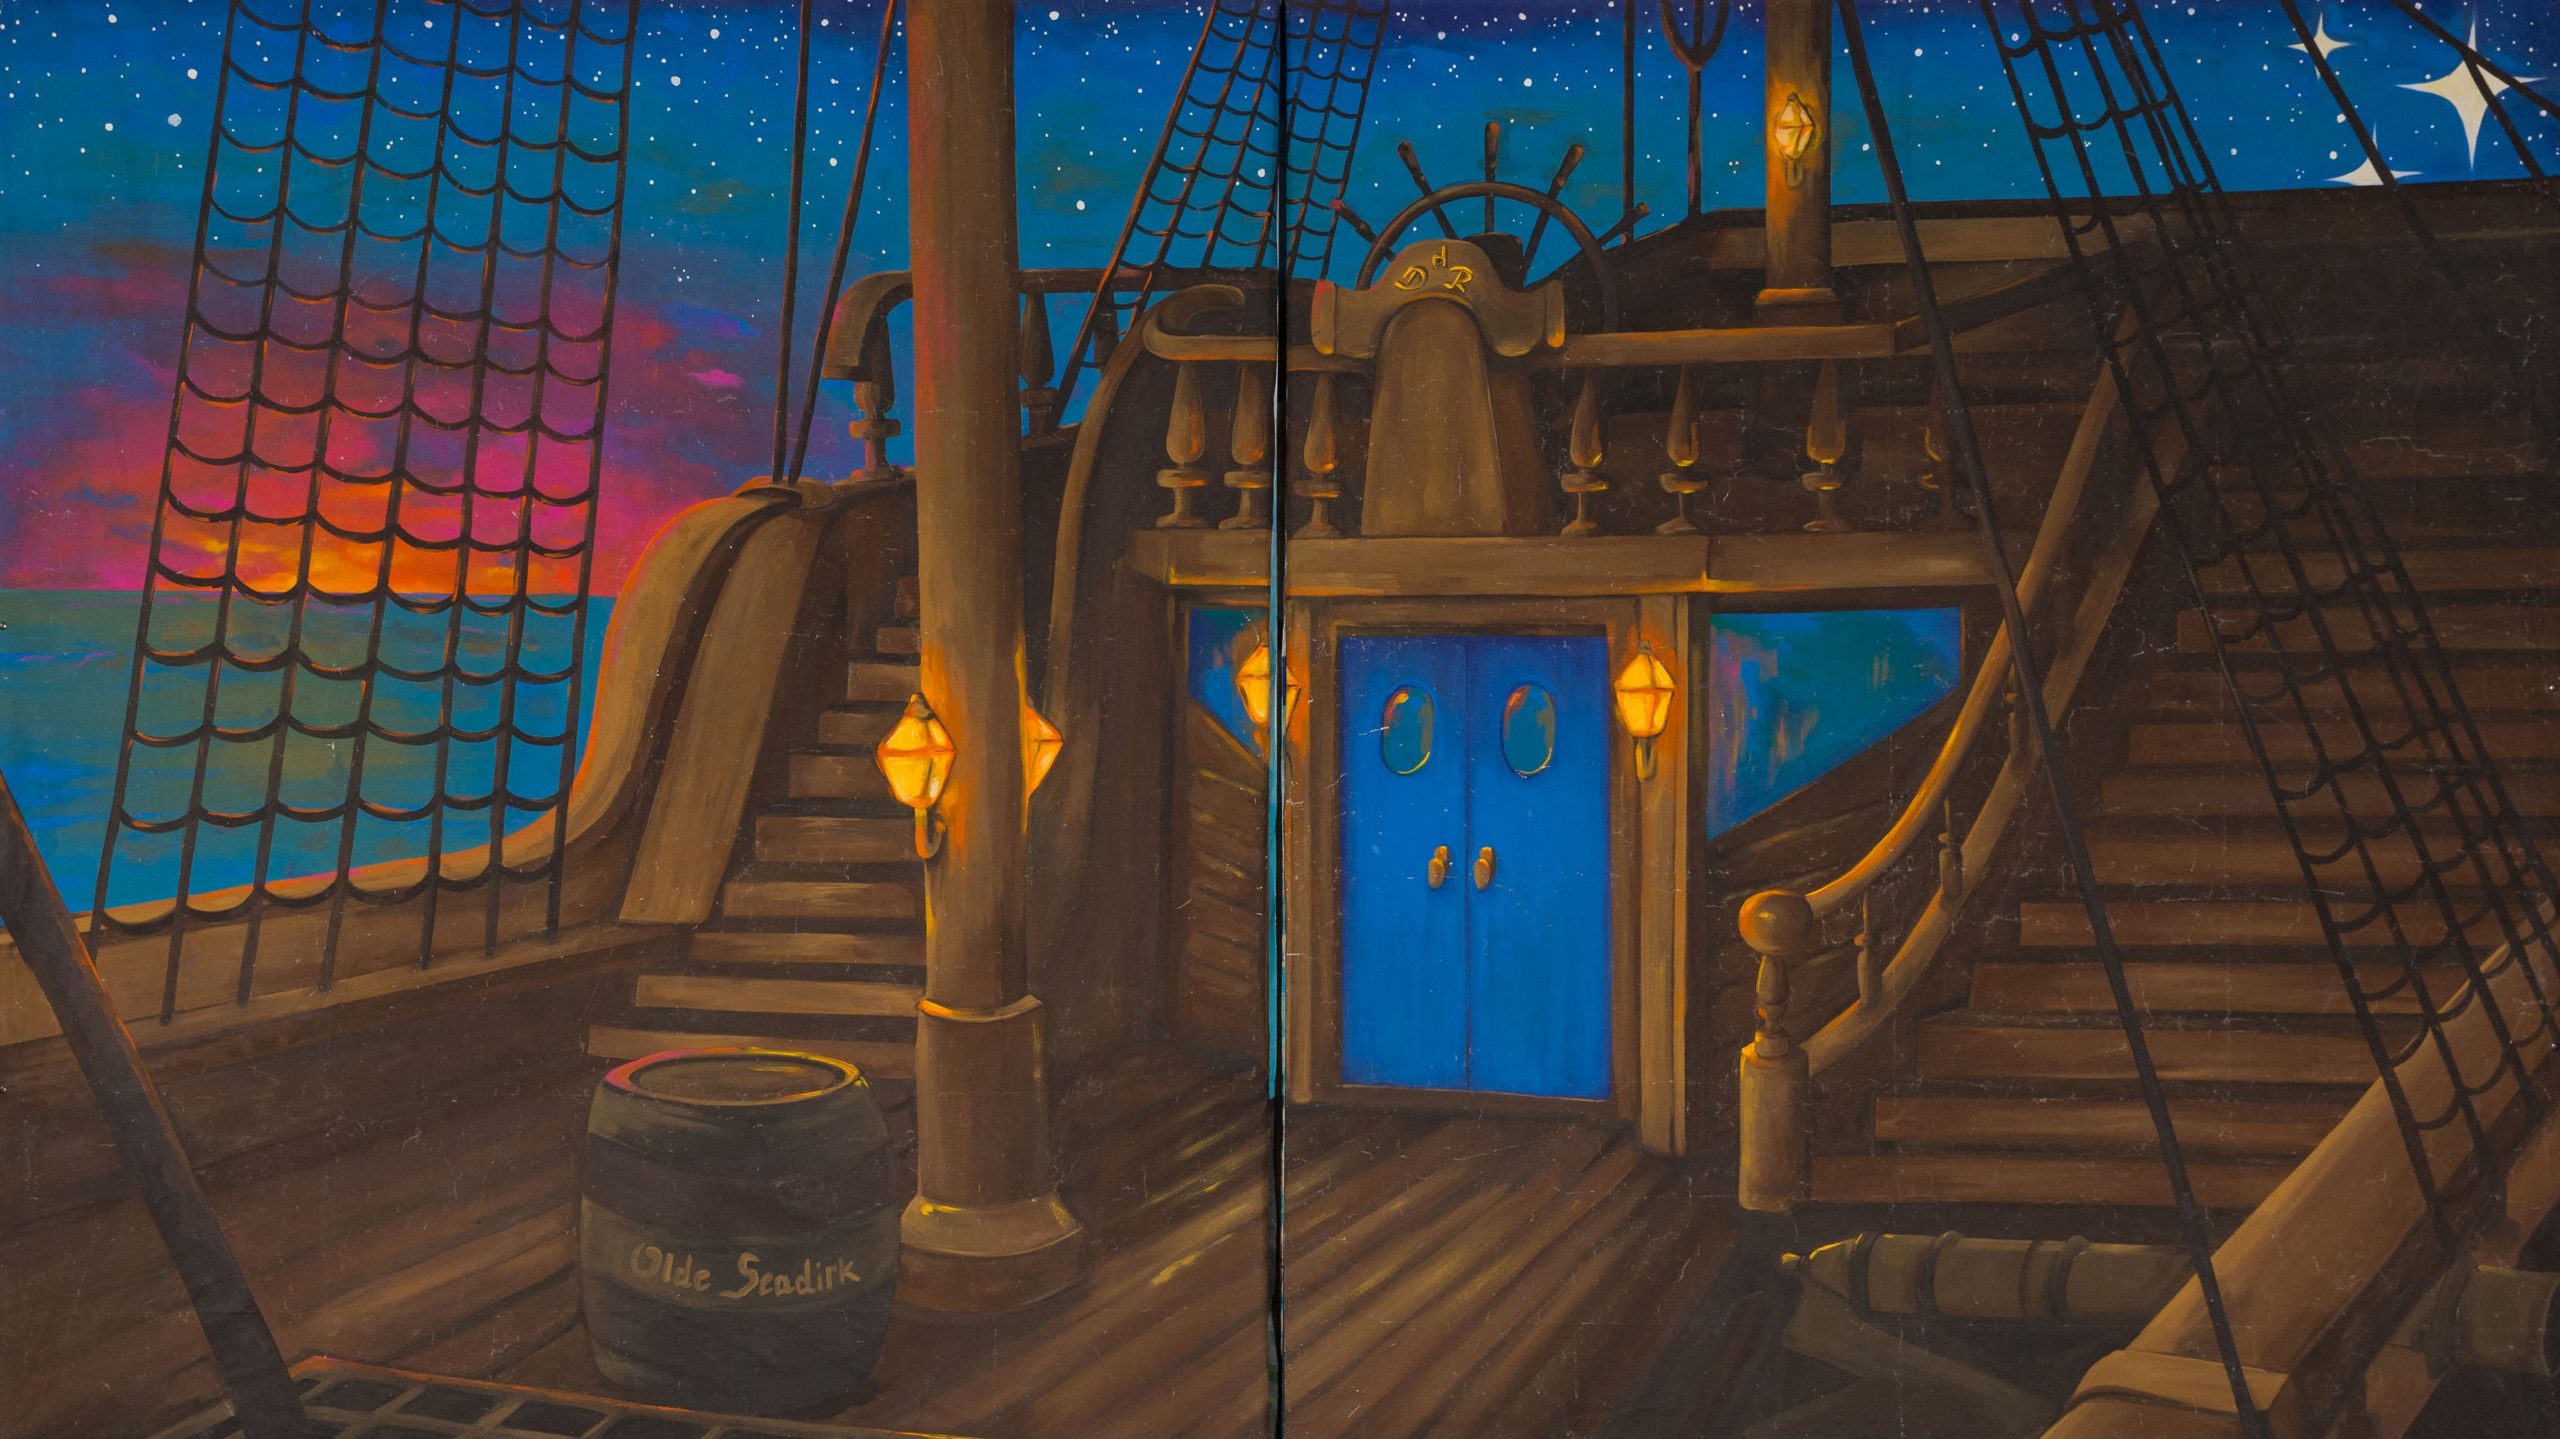 The ship scenery for The Pirates of Penzance featuring a ship with a late sunset background